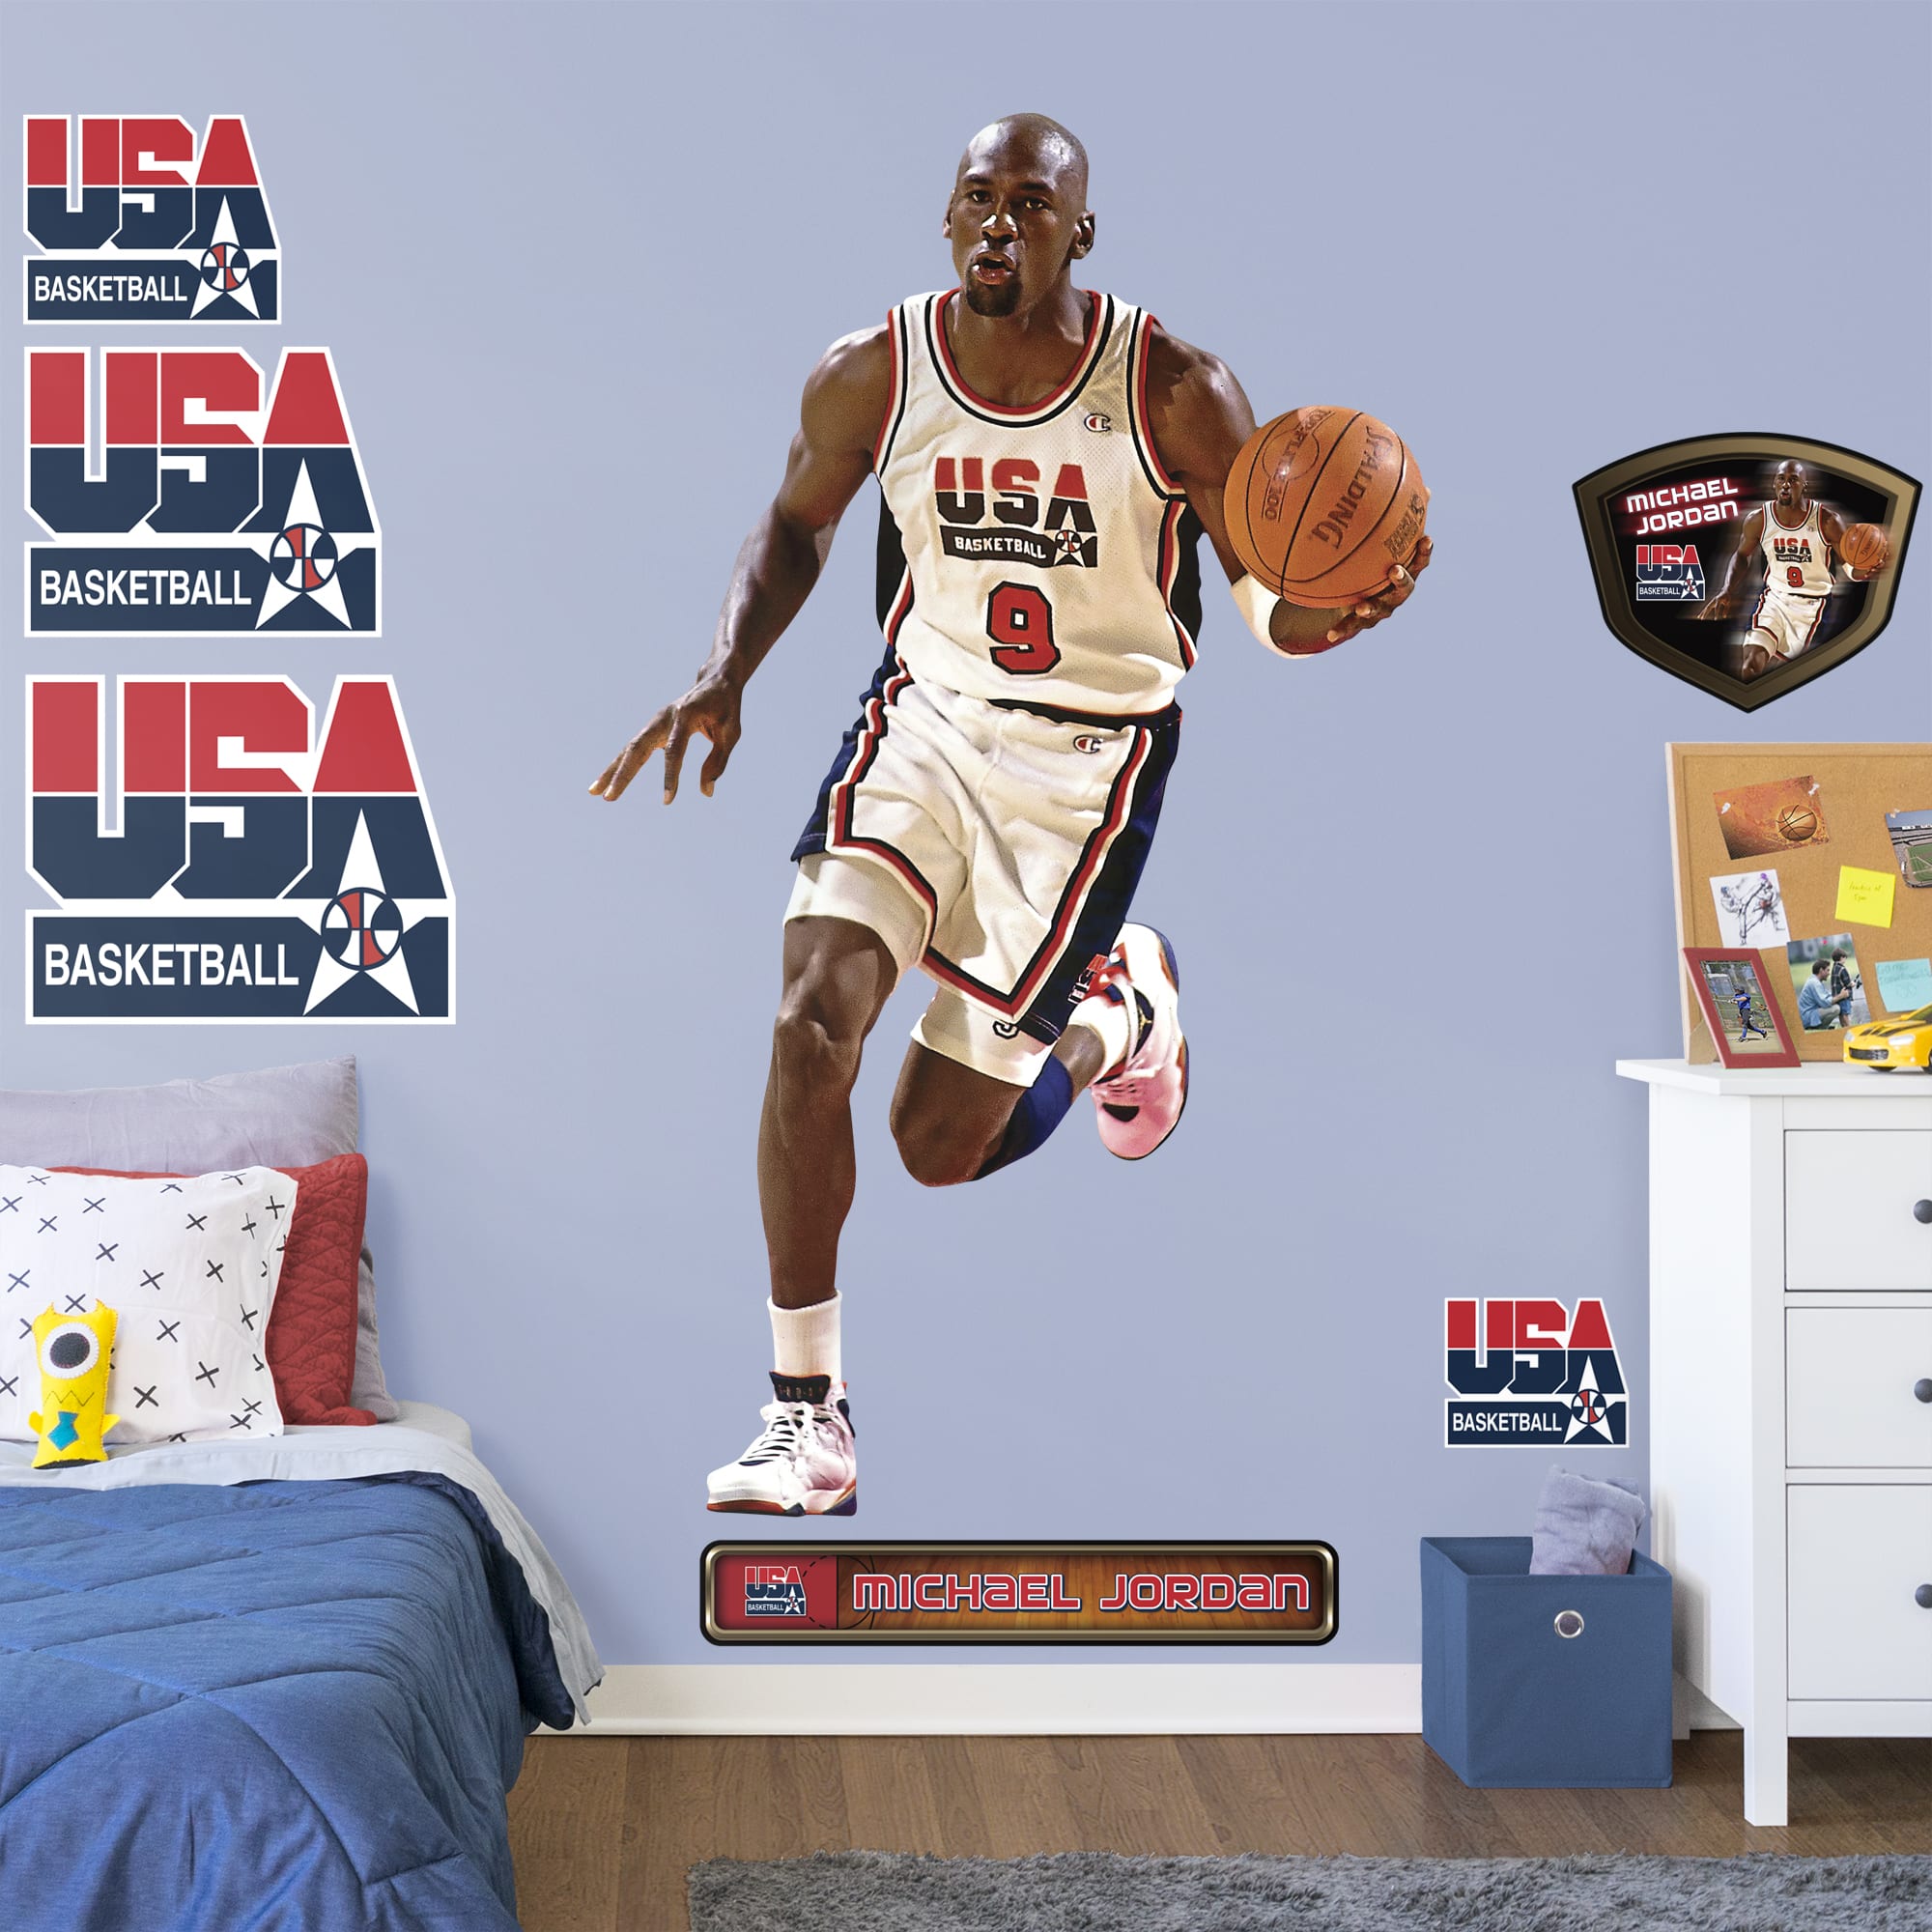 Michael Jordan: 1992 Dream Team - Officially Licensed NBA Removable Wall Decal Life-Size Athlete + 7 Decals (46"W x 78"H) by Fat